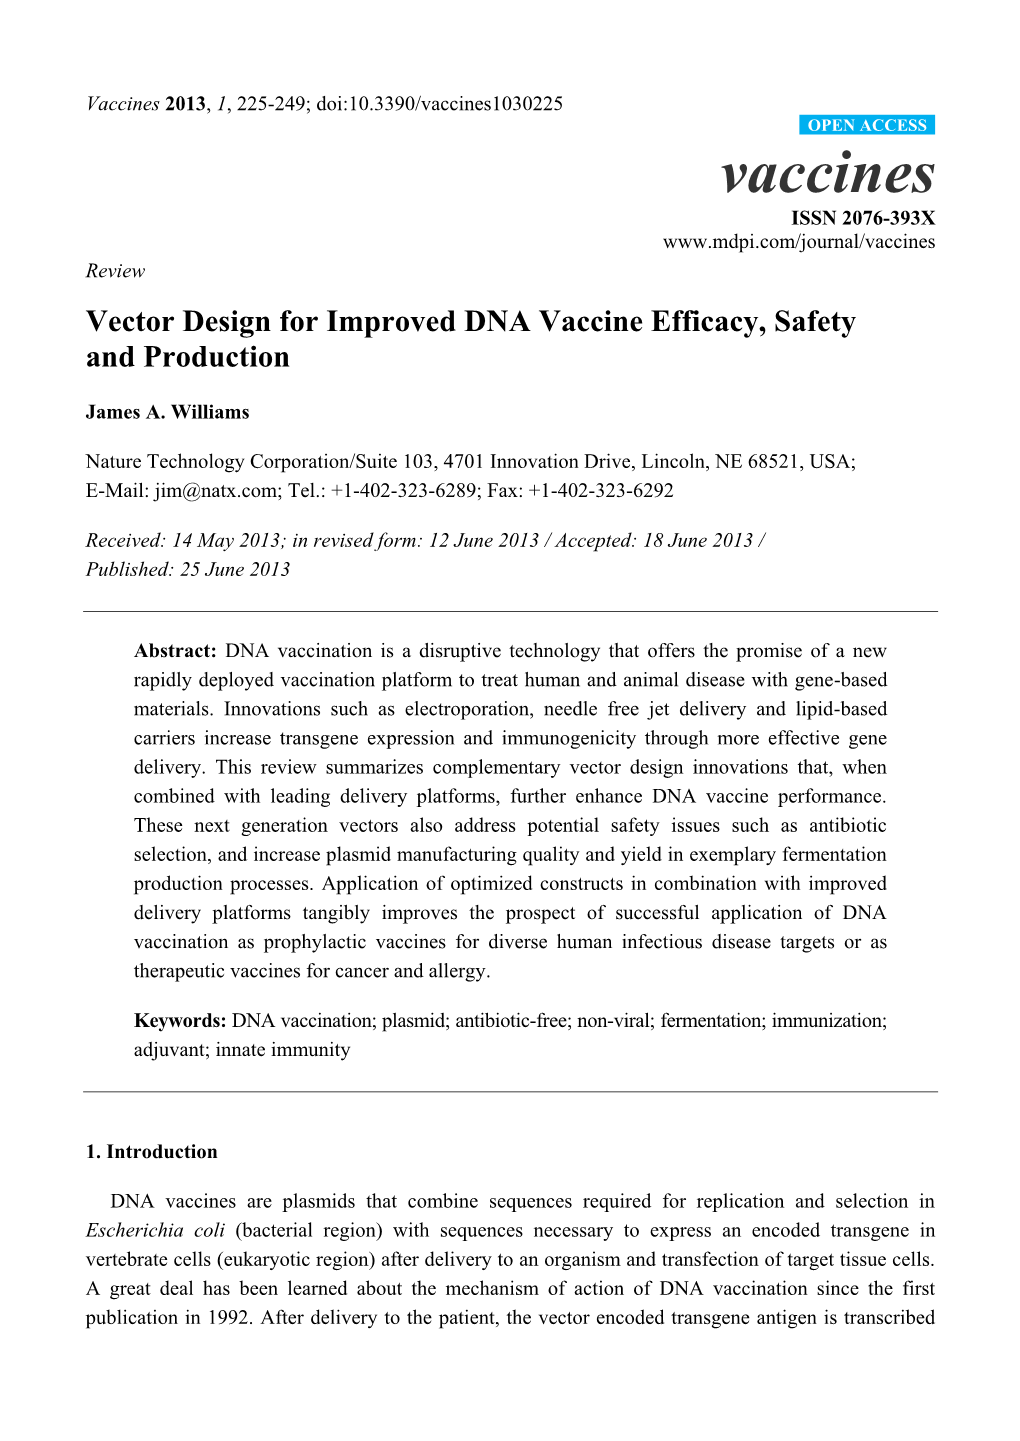 Vector Design for Improved DNA Vaccine Efficacy, Safety and Production